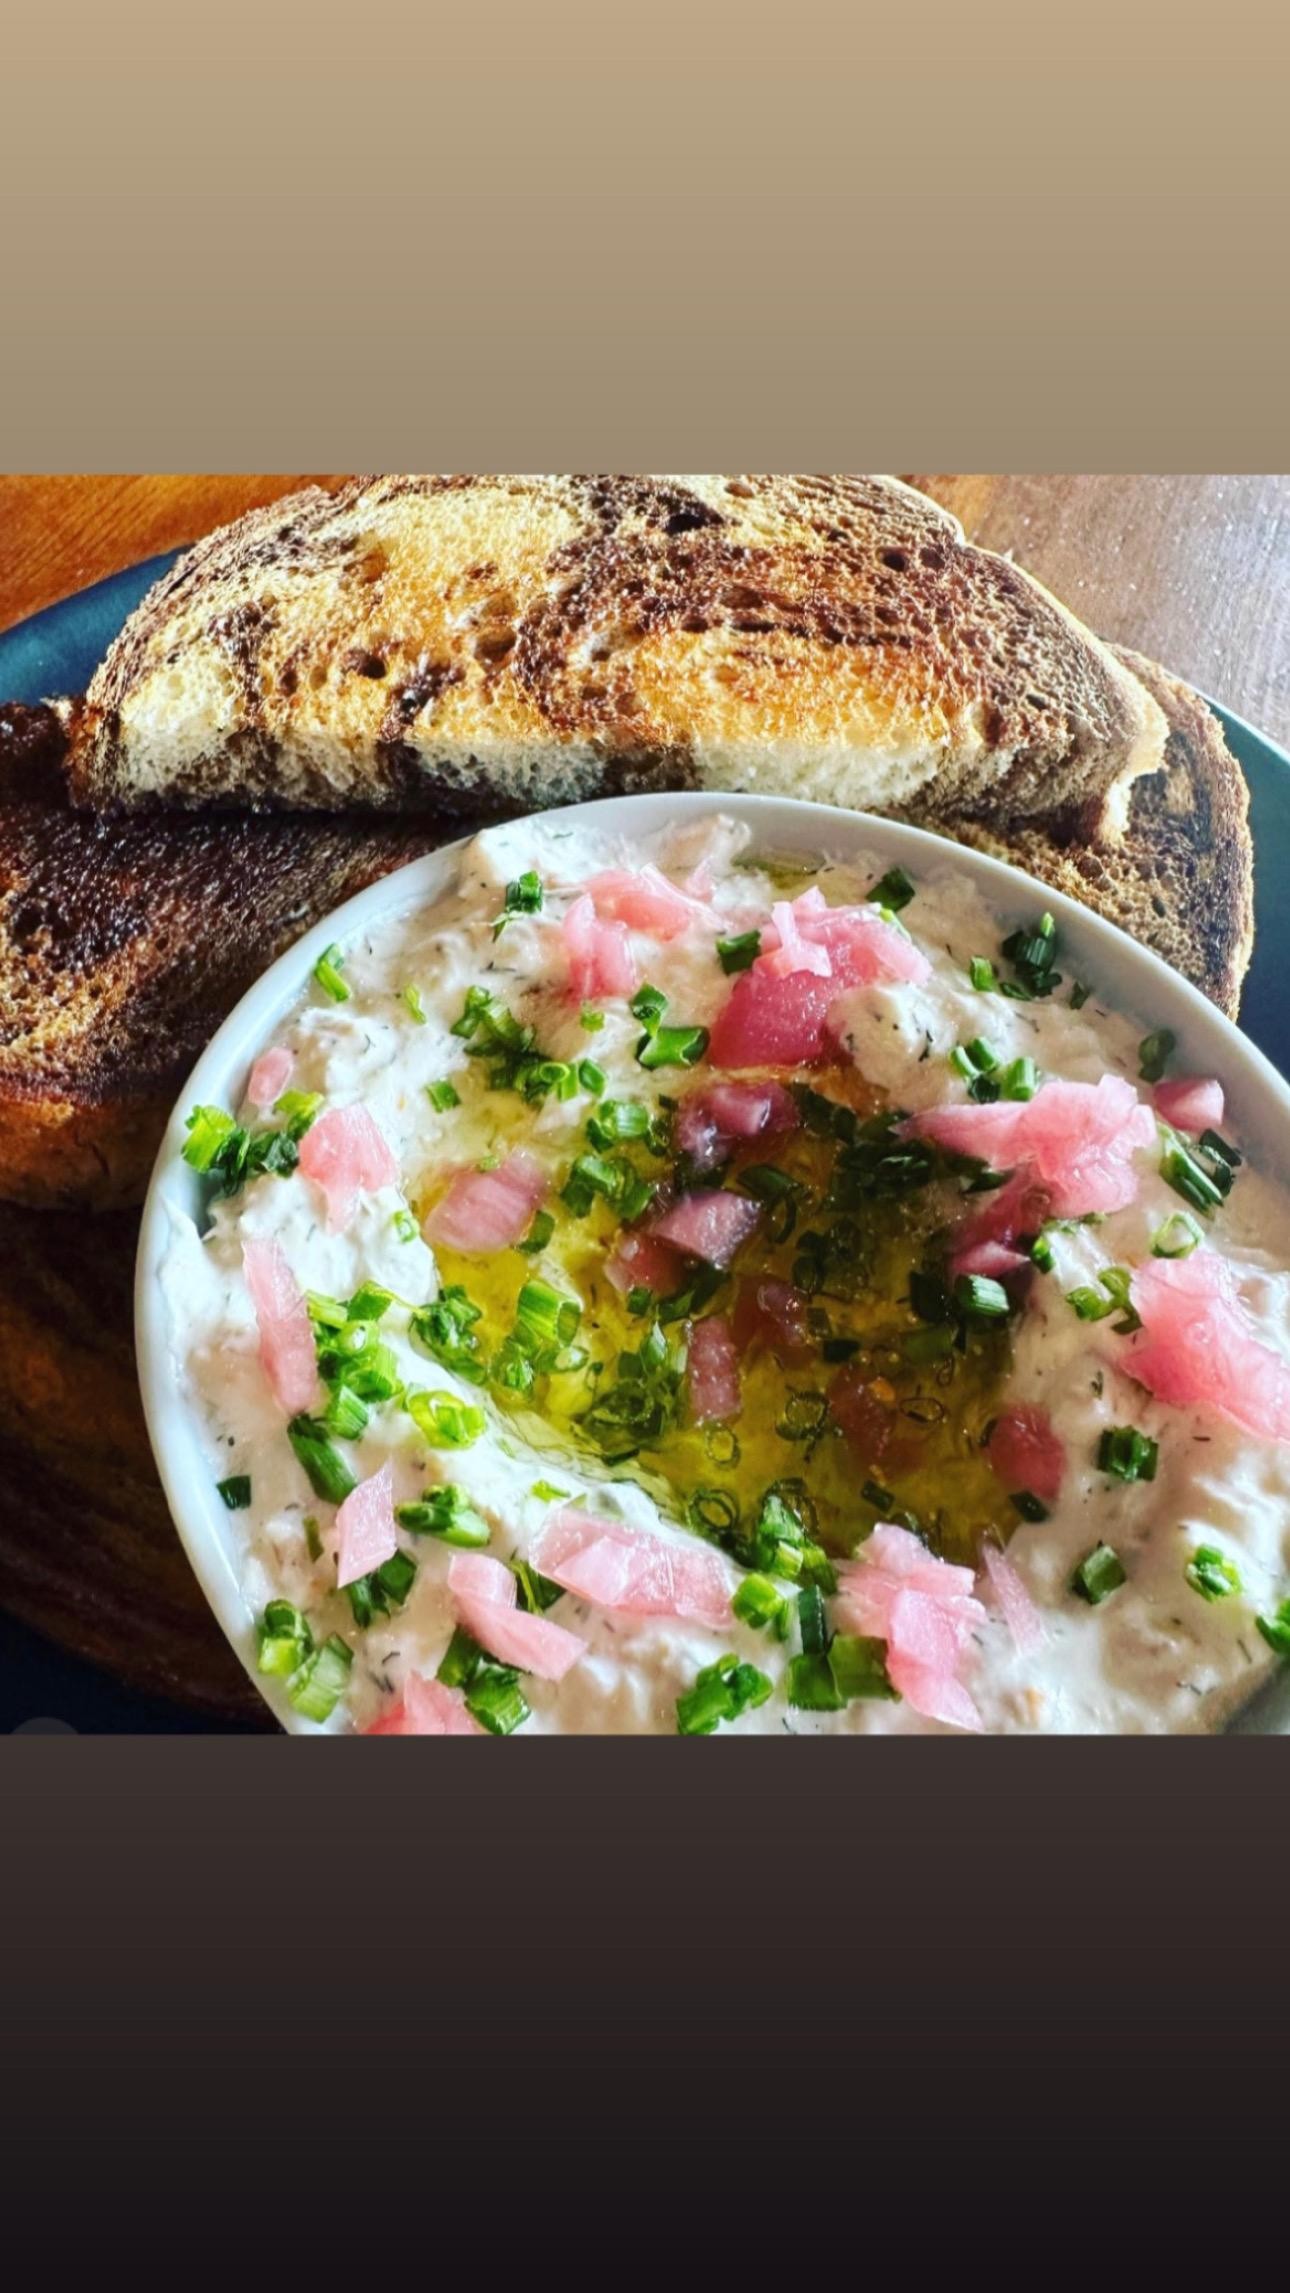 SMOKED TROUT DIP